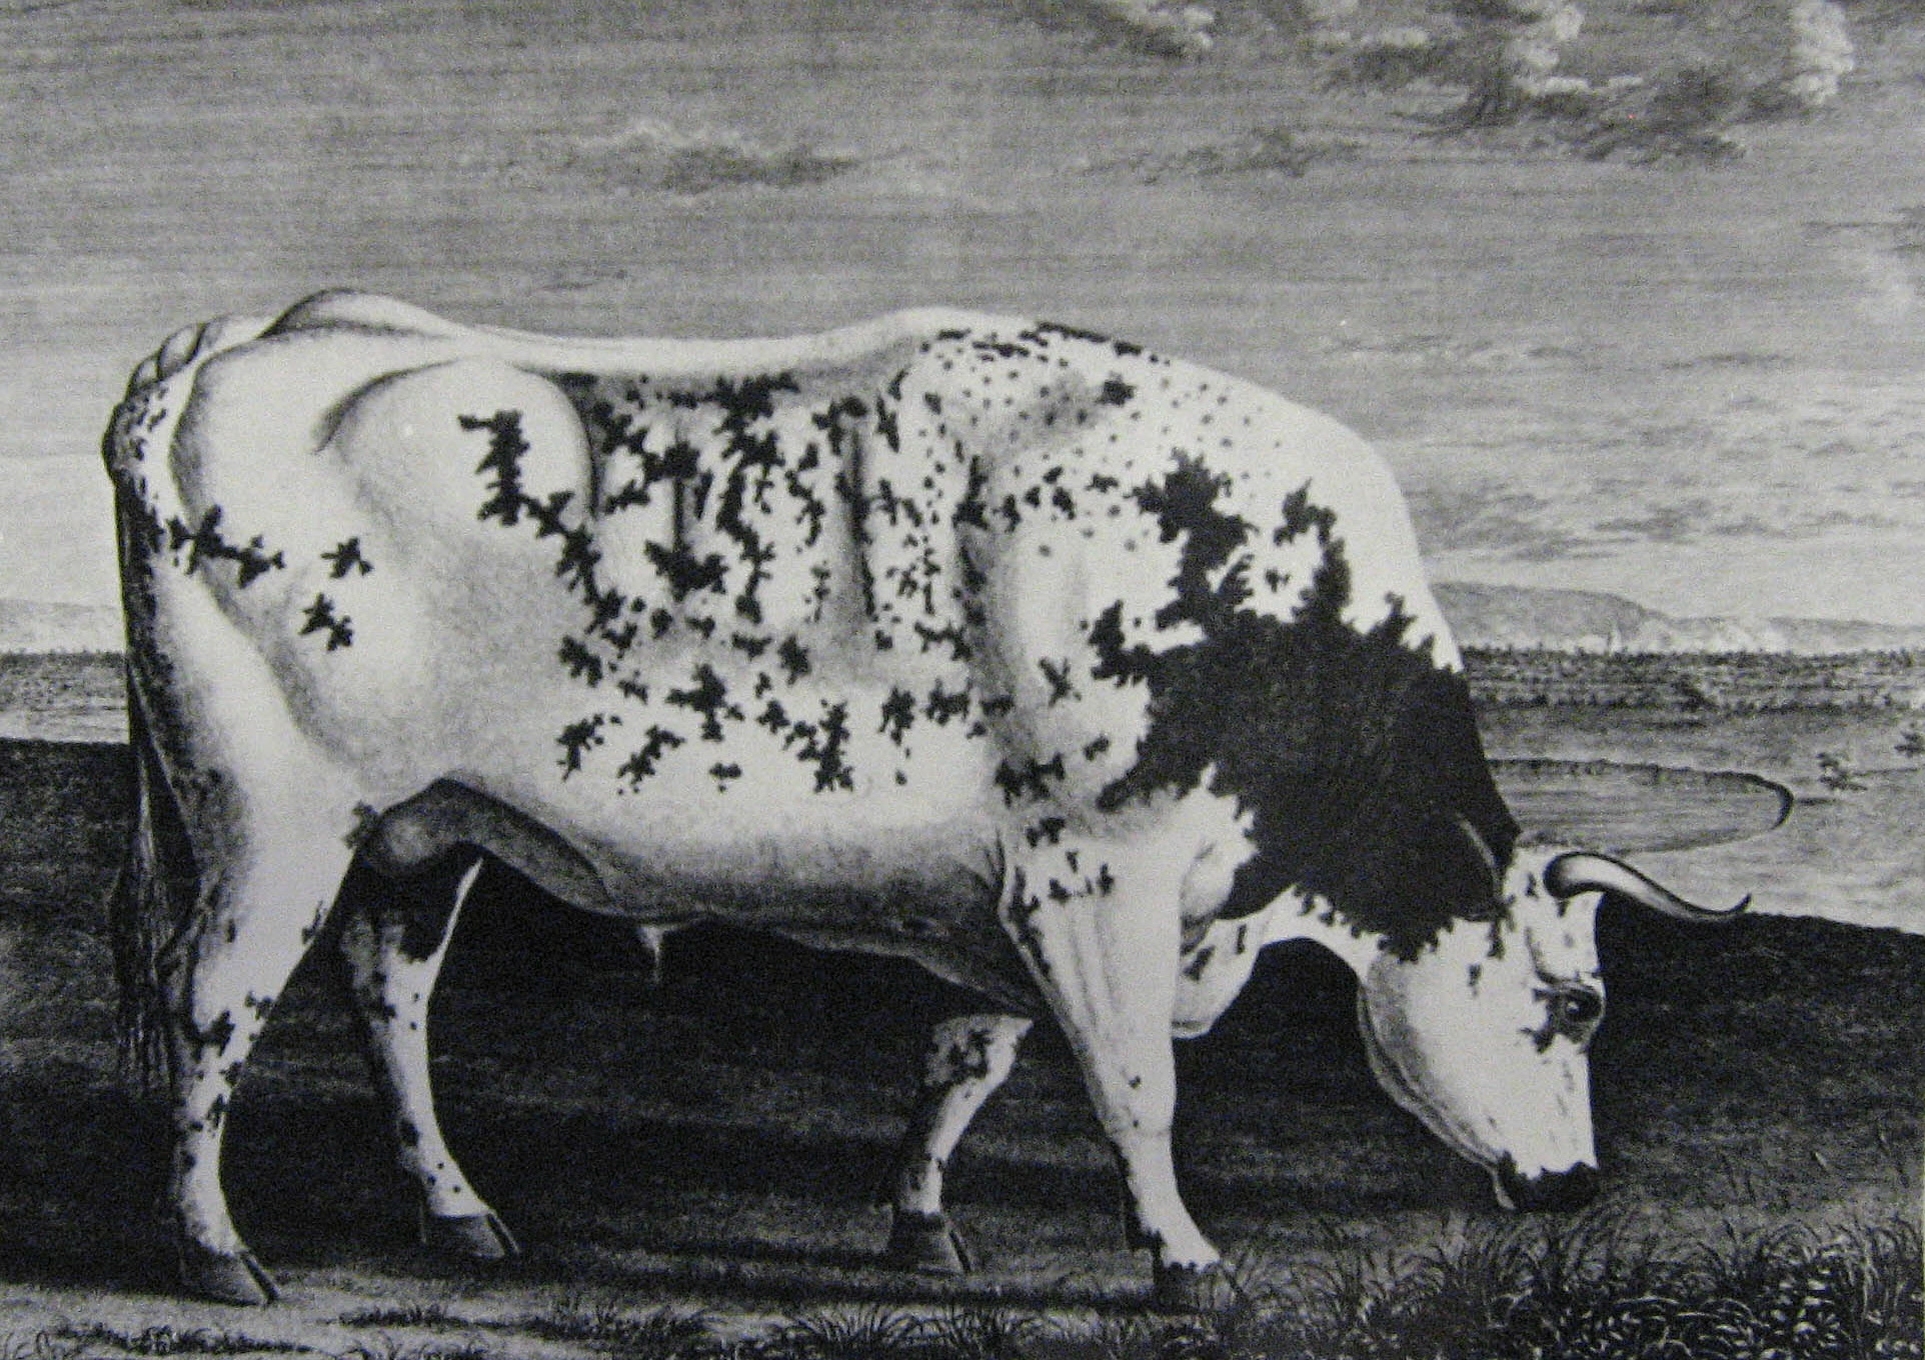 The Blackwell Ox, which was slaughtered in 1779 and was the first shorthorn star